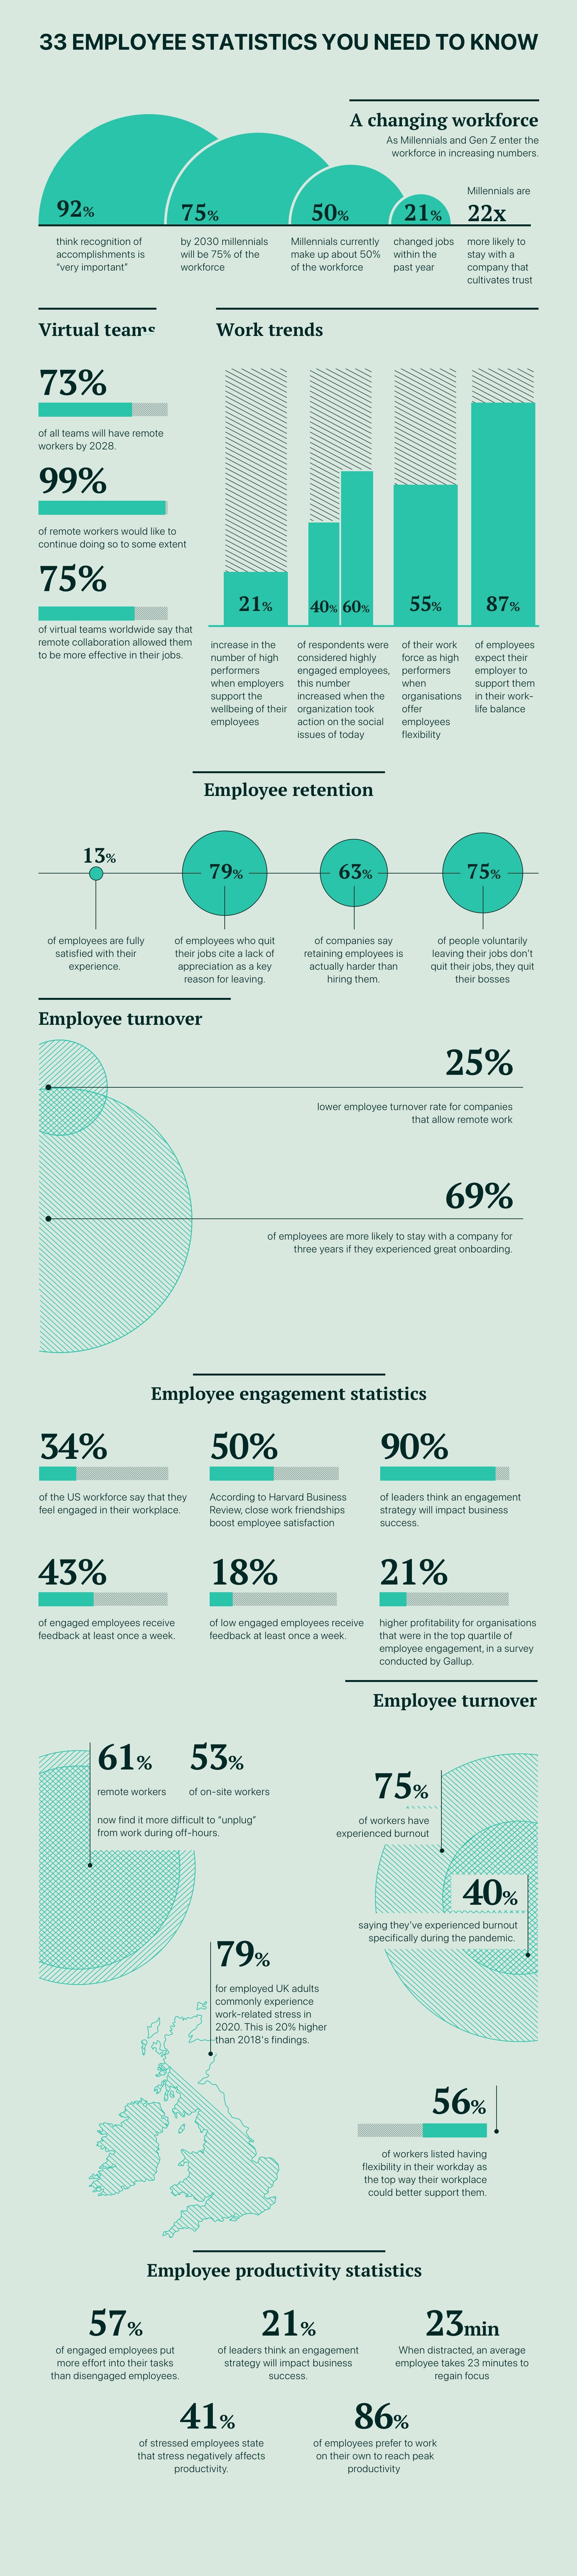 33 employee statistics you need to know about